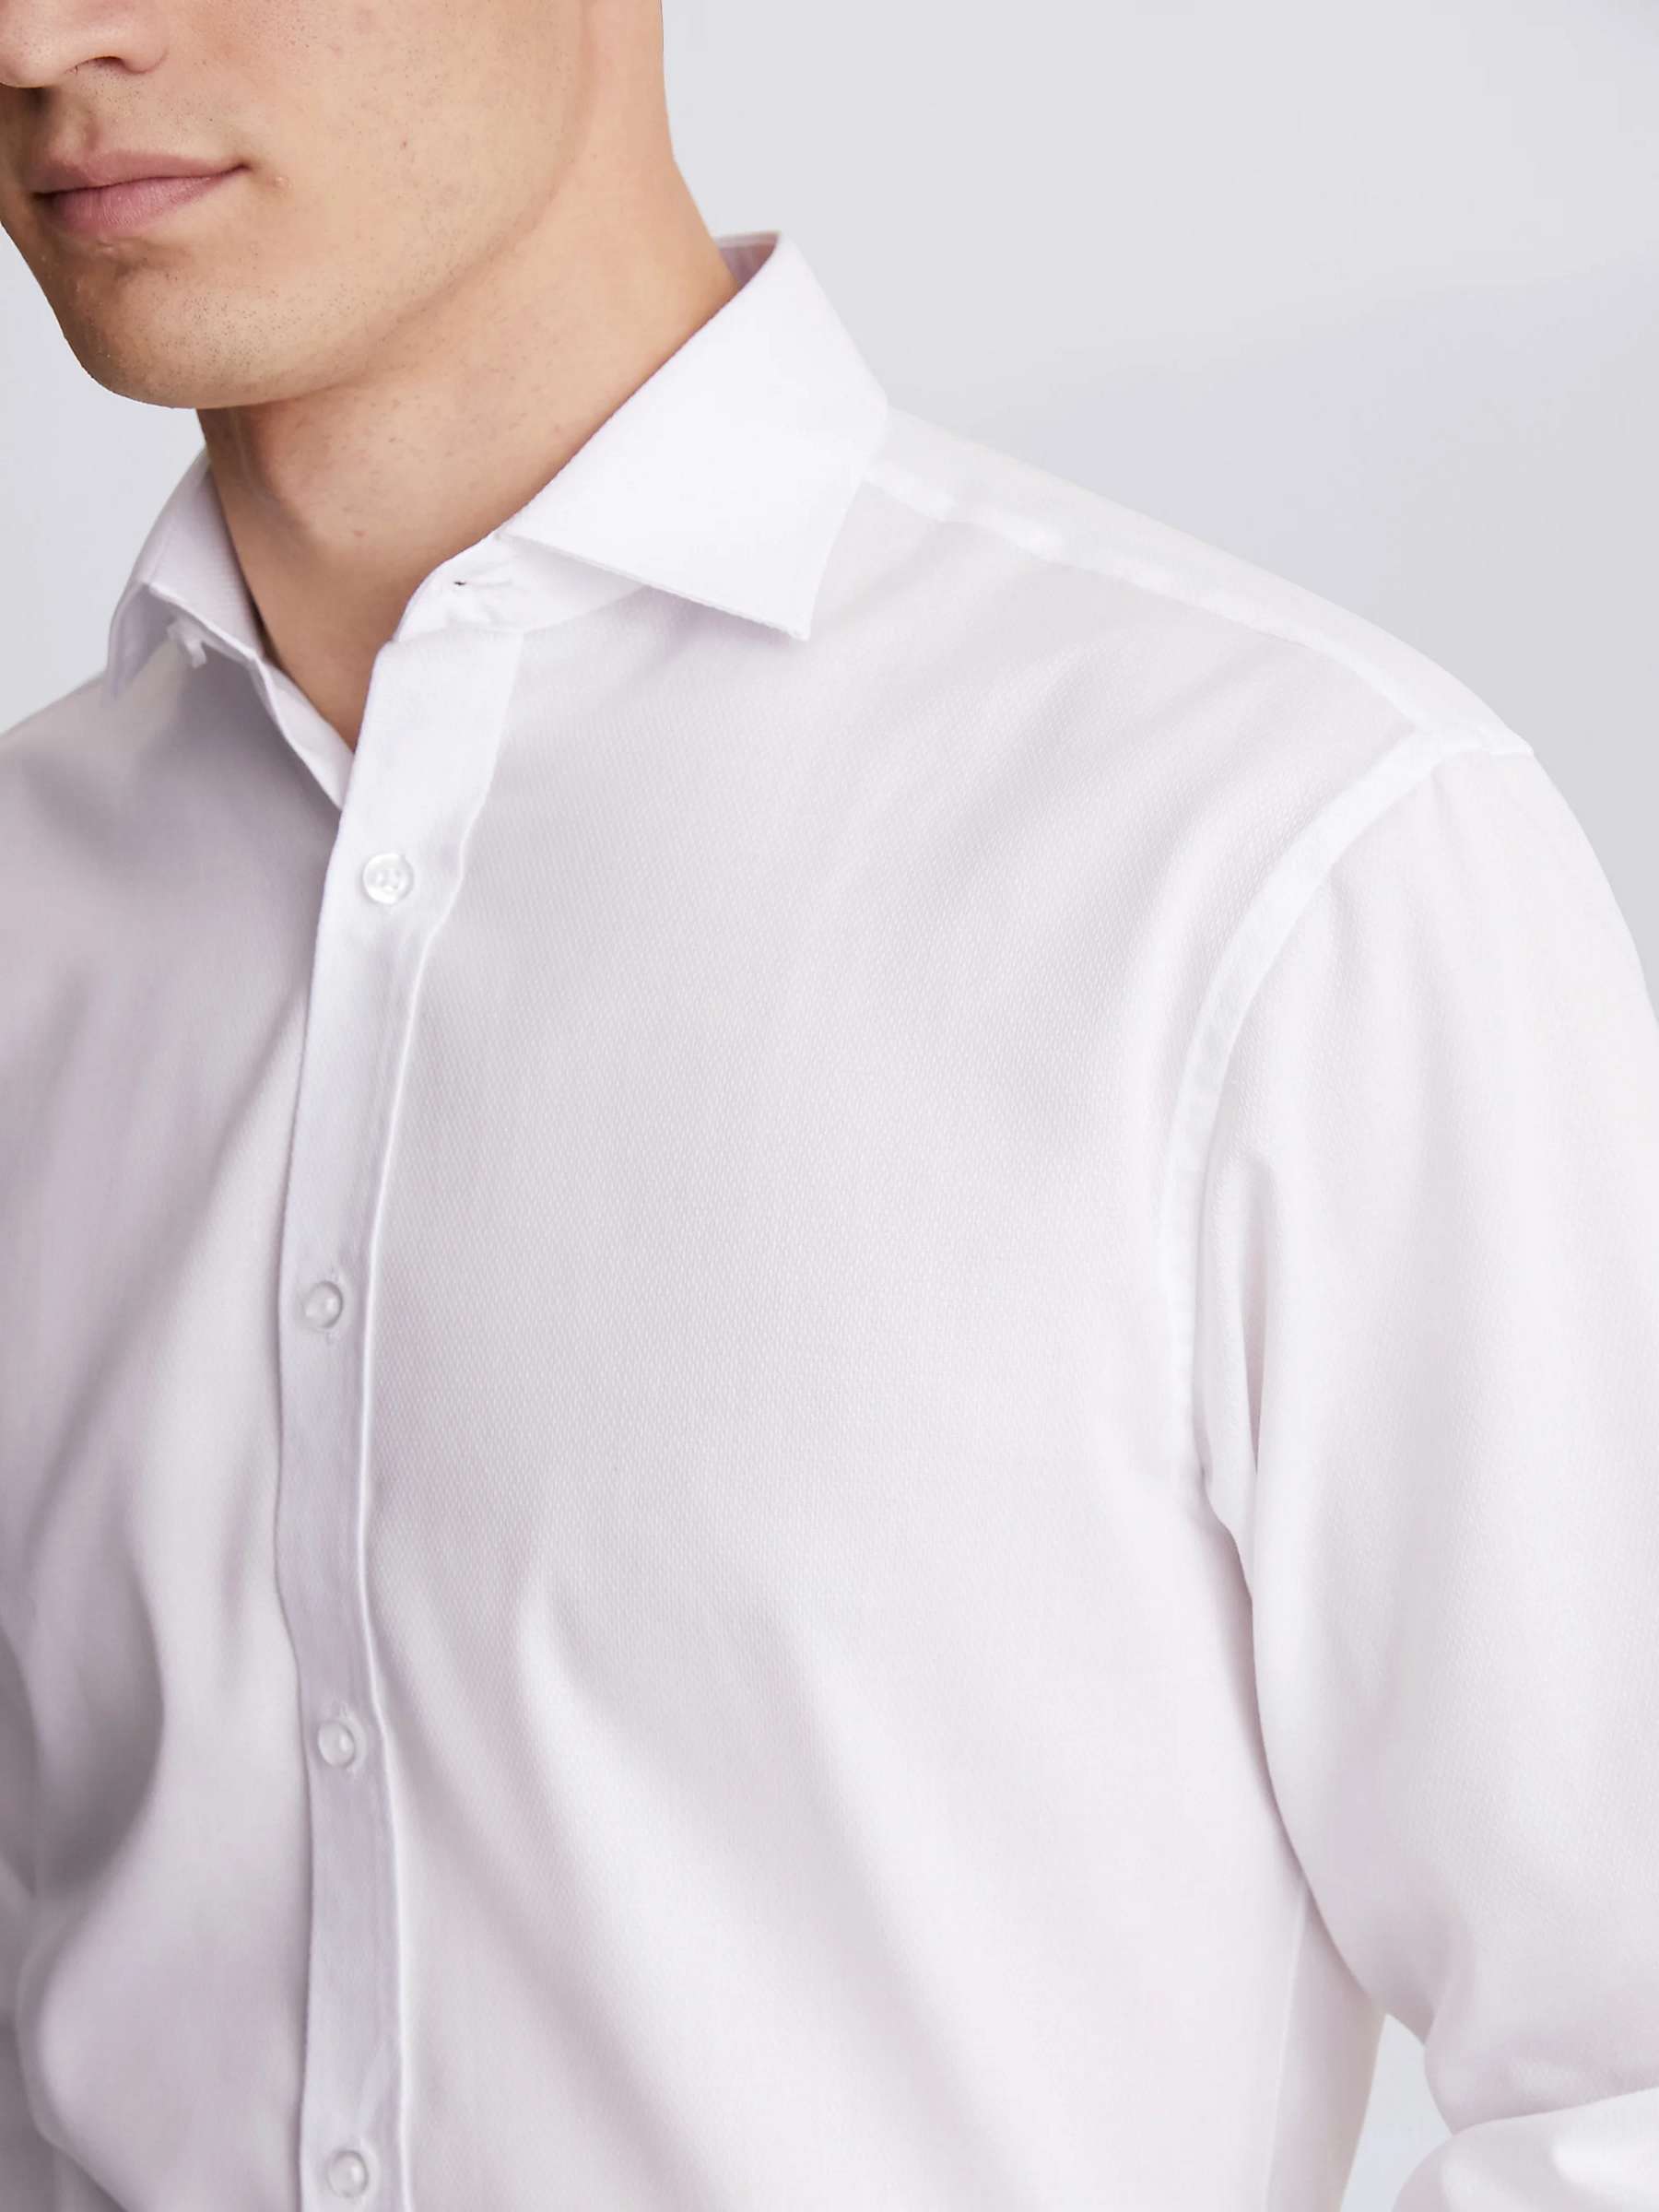 Buy Moss Regular Fit Double Cuff Textured Shirt, White Online at johnlewis.com